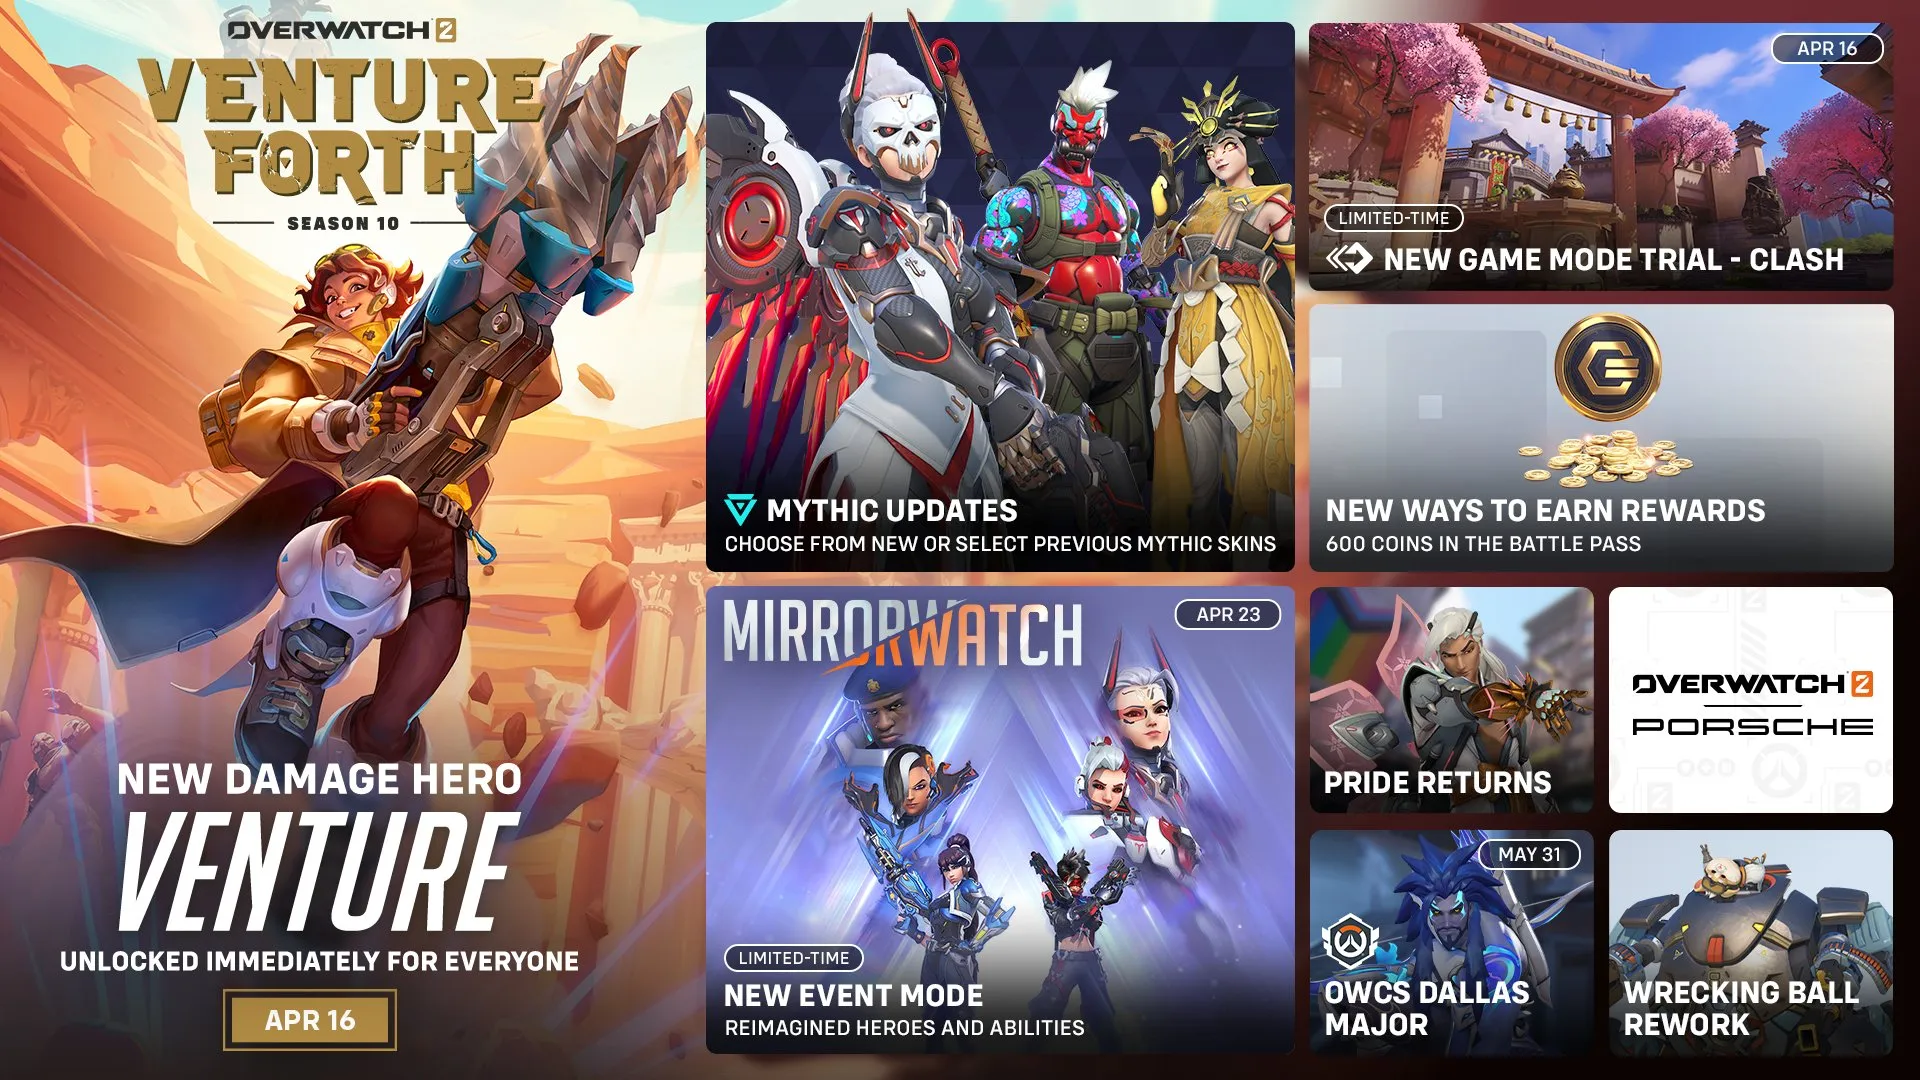 Overwatch 2 Season 10 Battle Pass Overwatch 2 Season 10 New Hanzo OWCS Skin: Release Date, Price, and More 